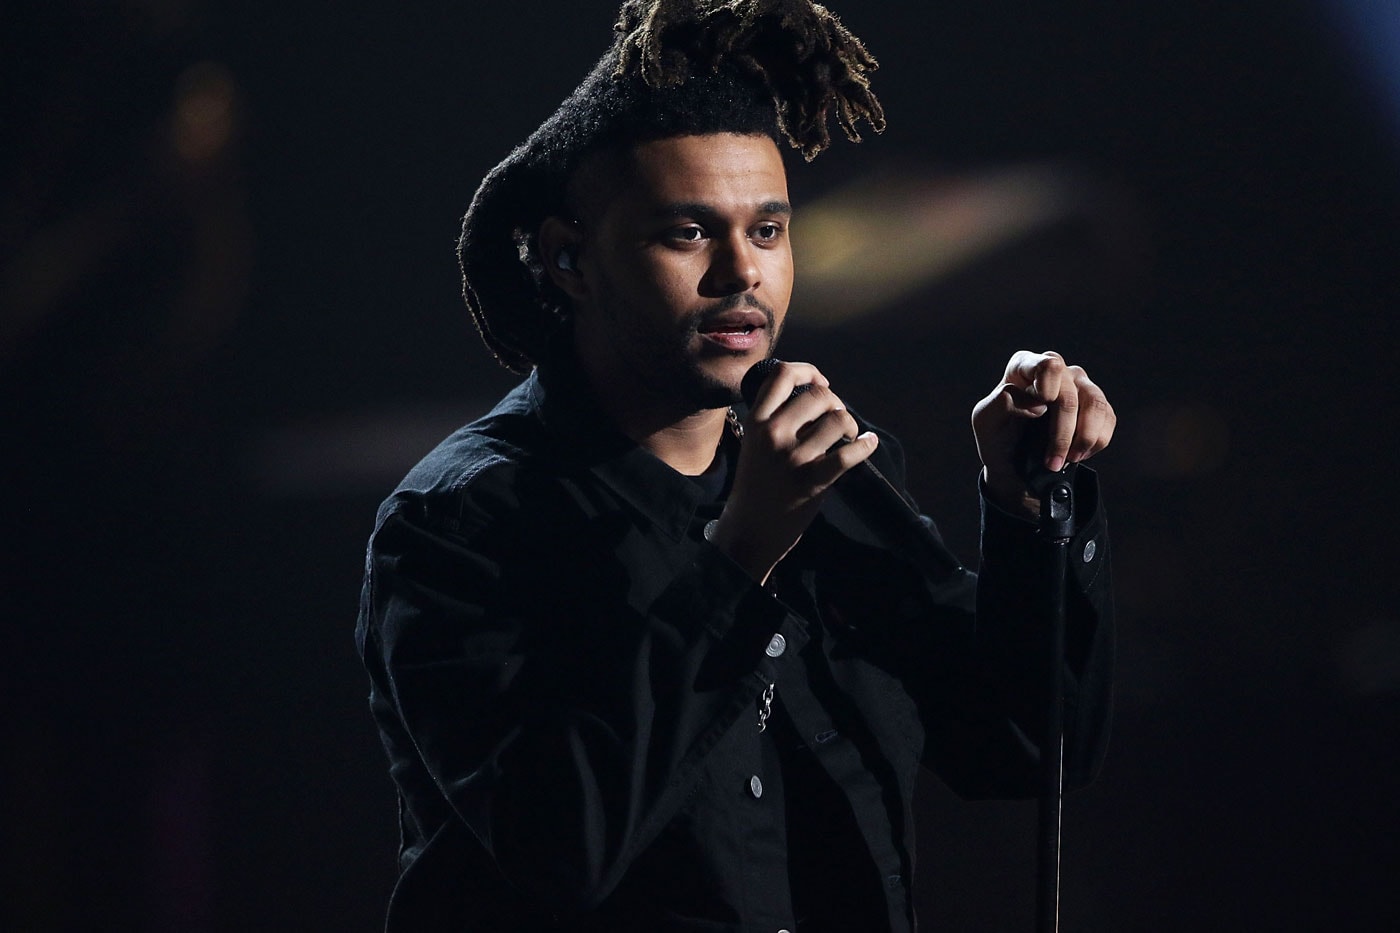 The Weeknd's Entire 'Beauty Behind the Madness' Is on the Hot R&B/Hip-Hop Chart